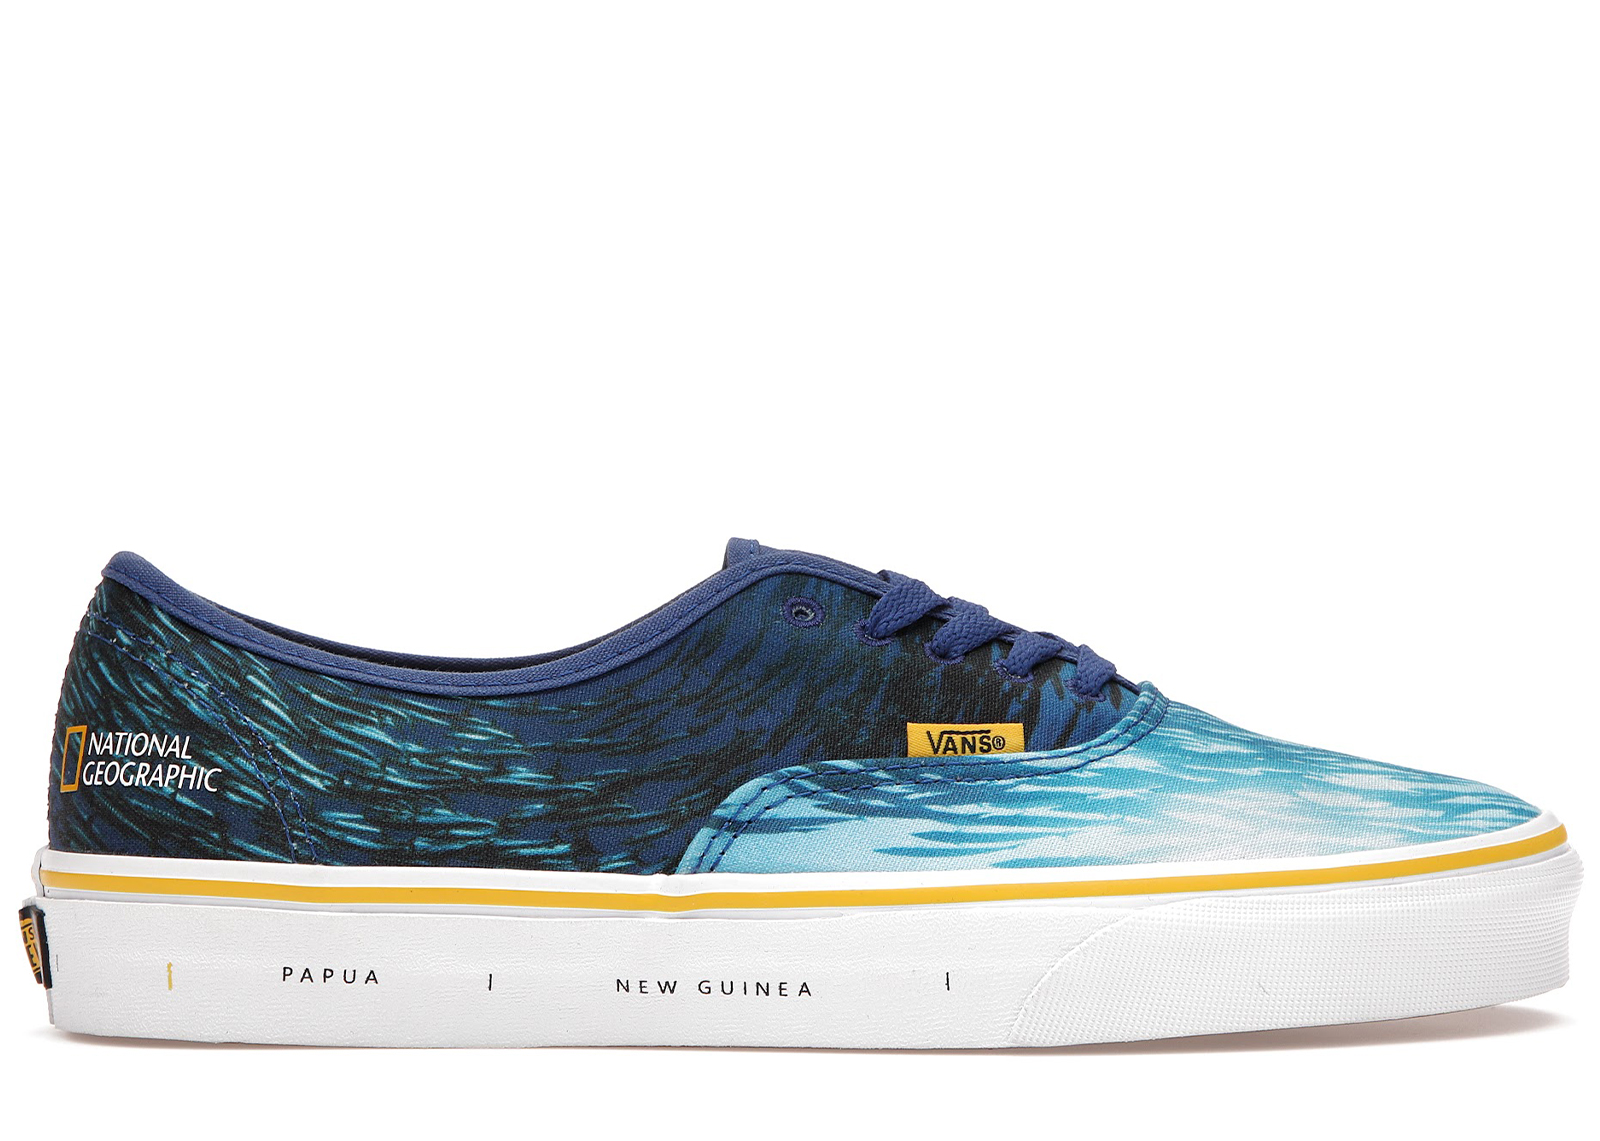 VANS NATIONAL GEOGRAPHIC